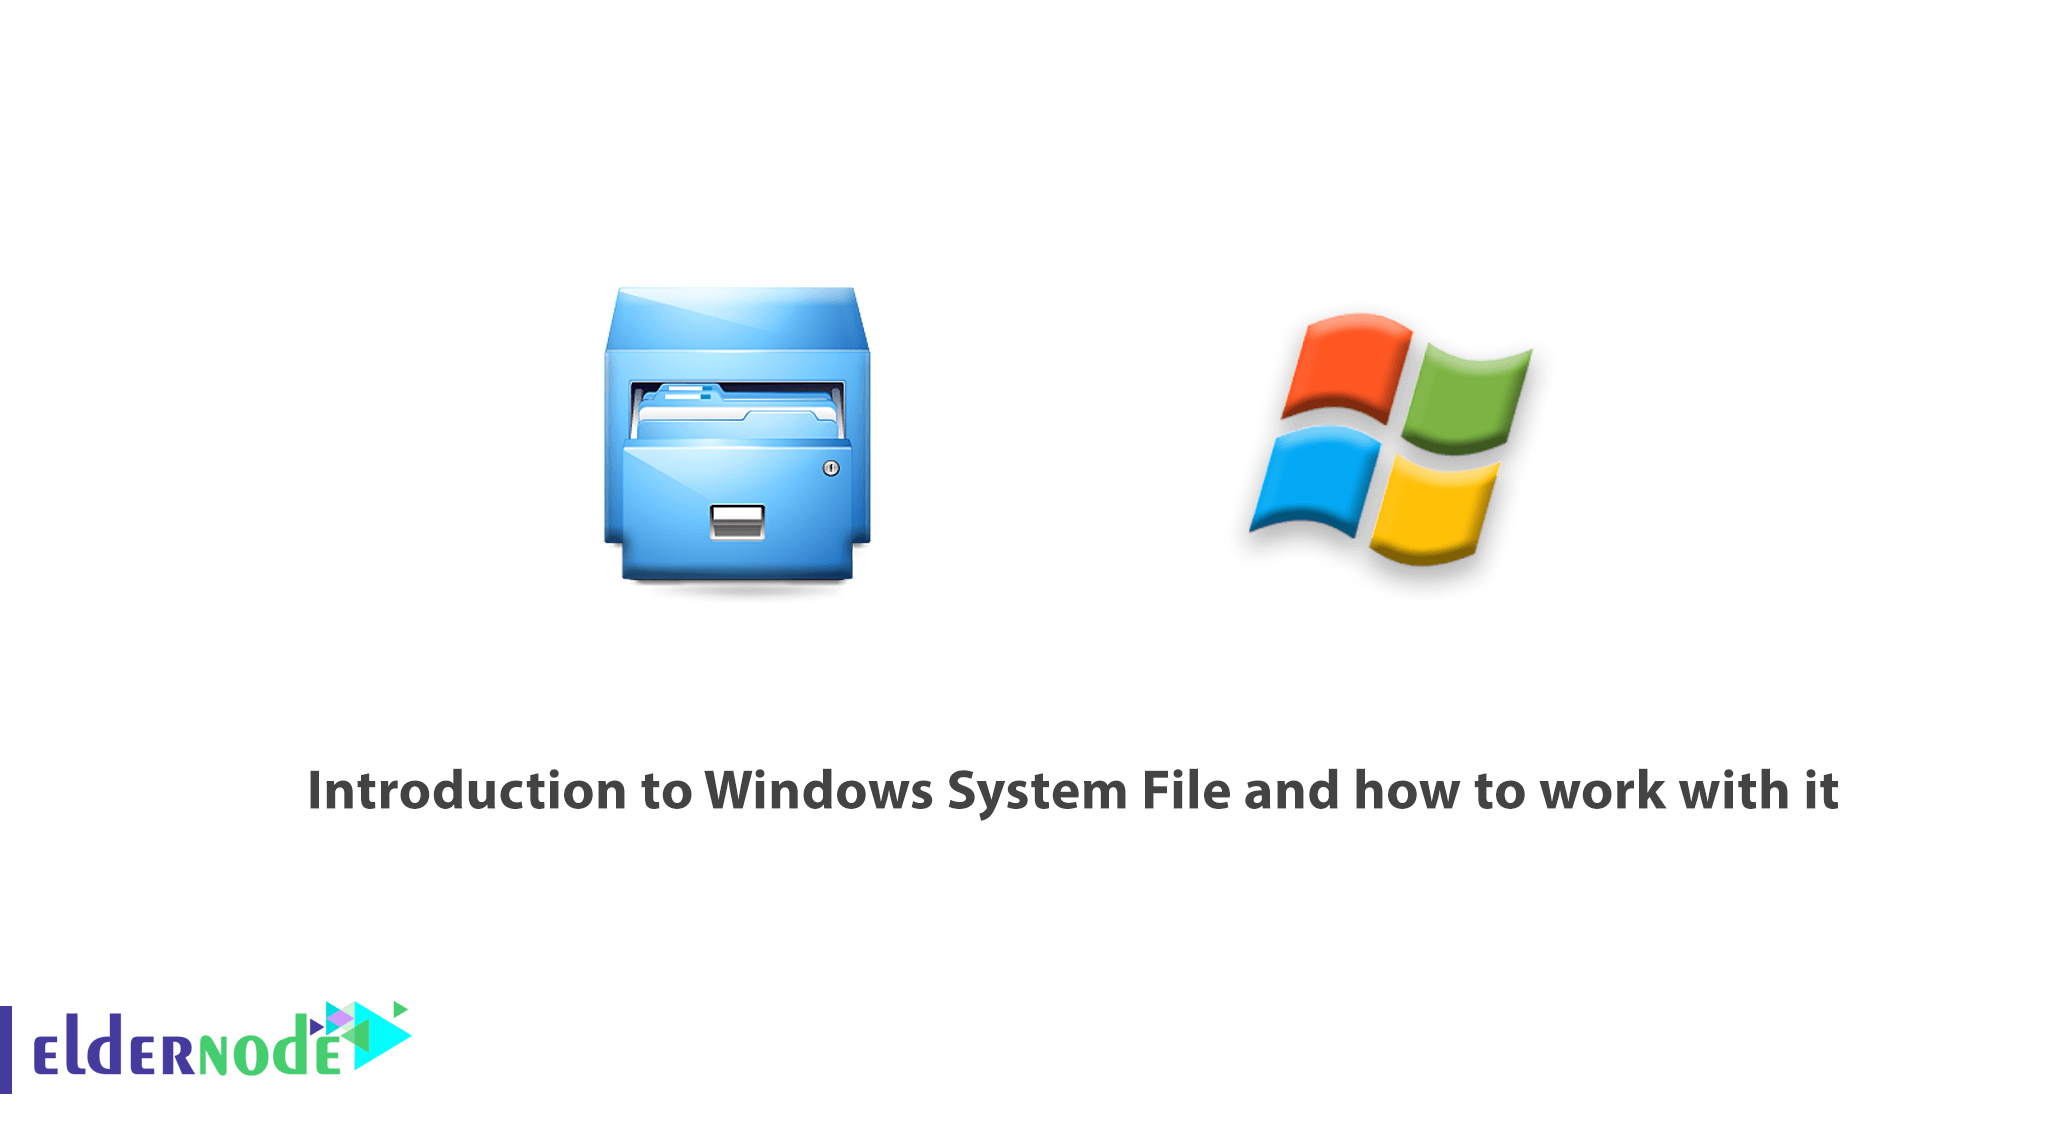 Introduction to Windows System File and how to work with it